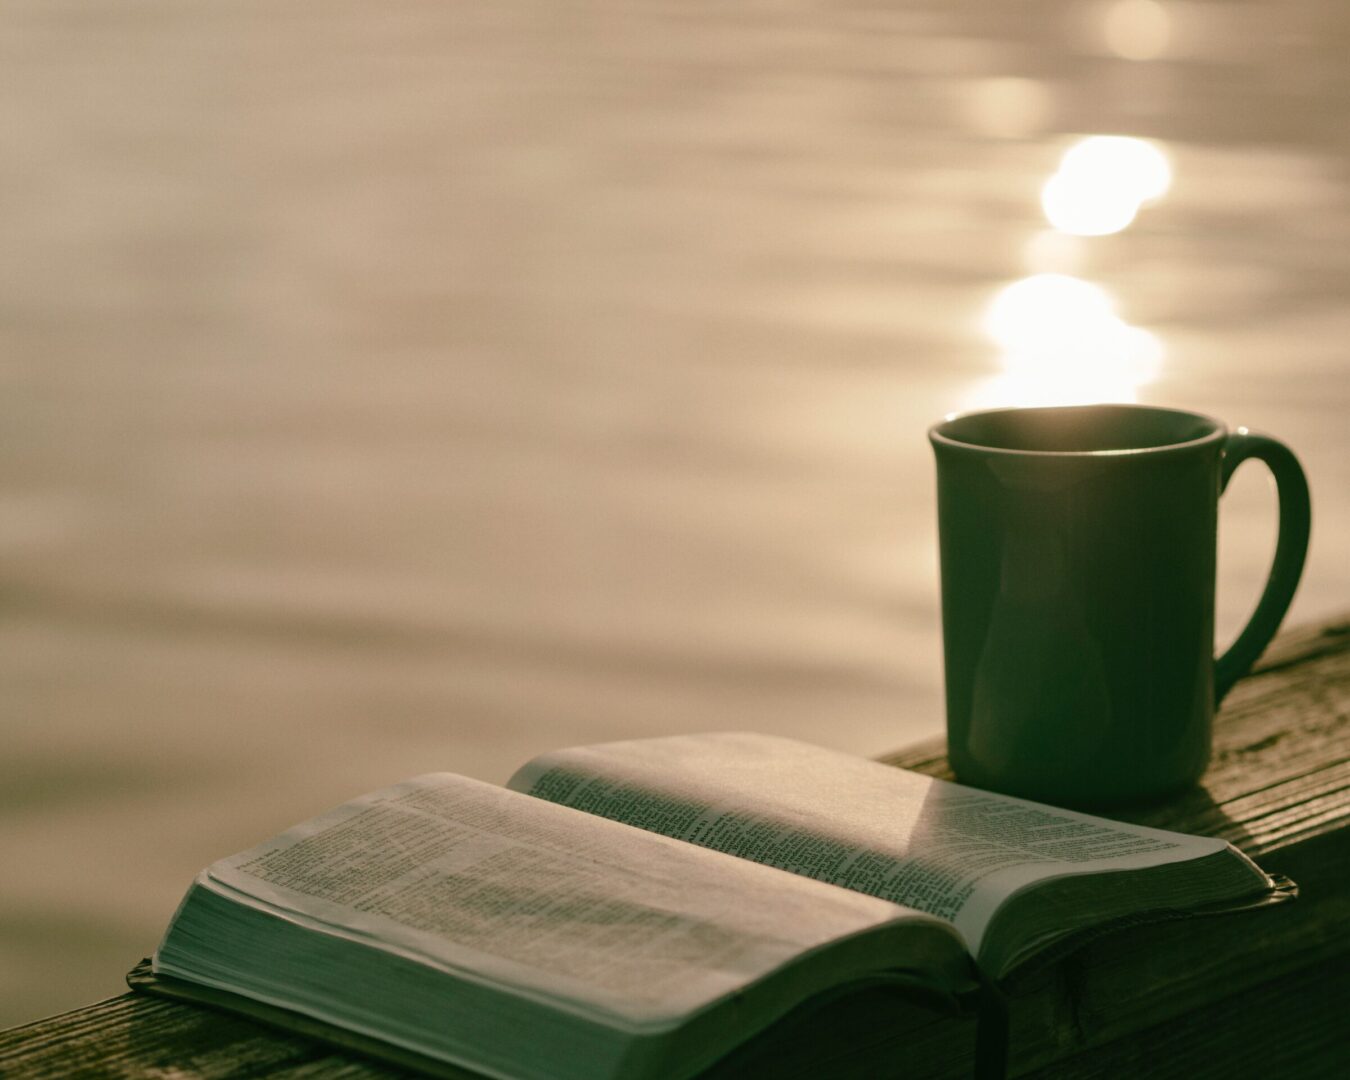 Bible open, coffee cup, lake in background